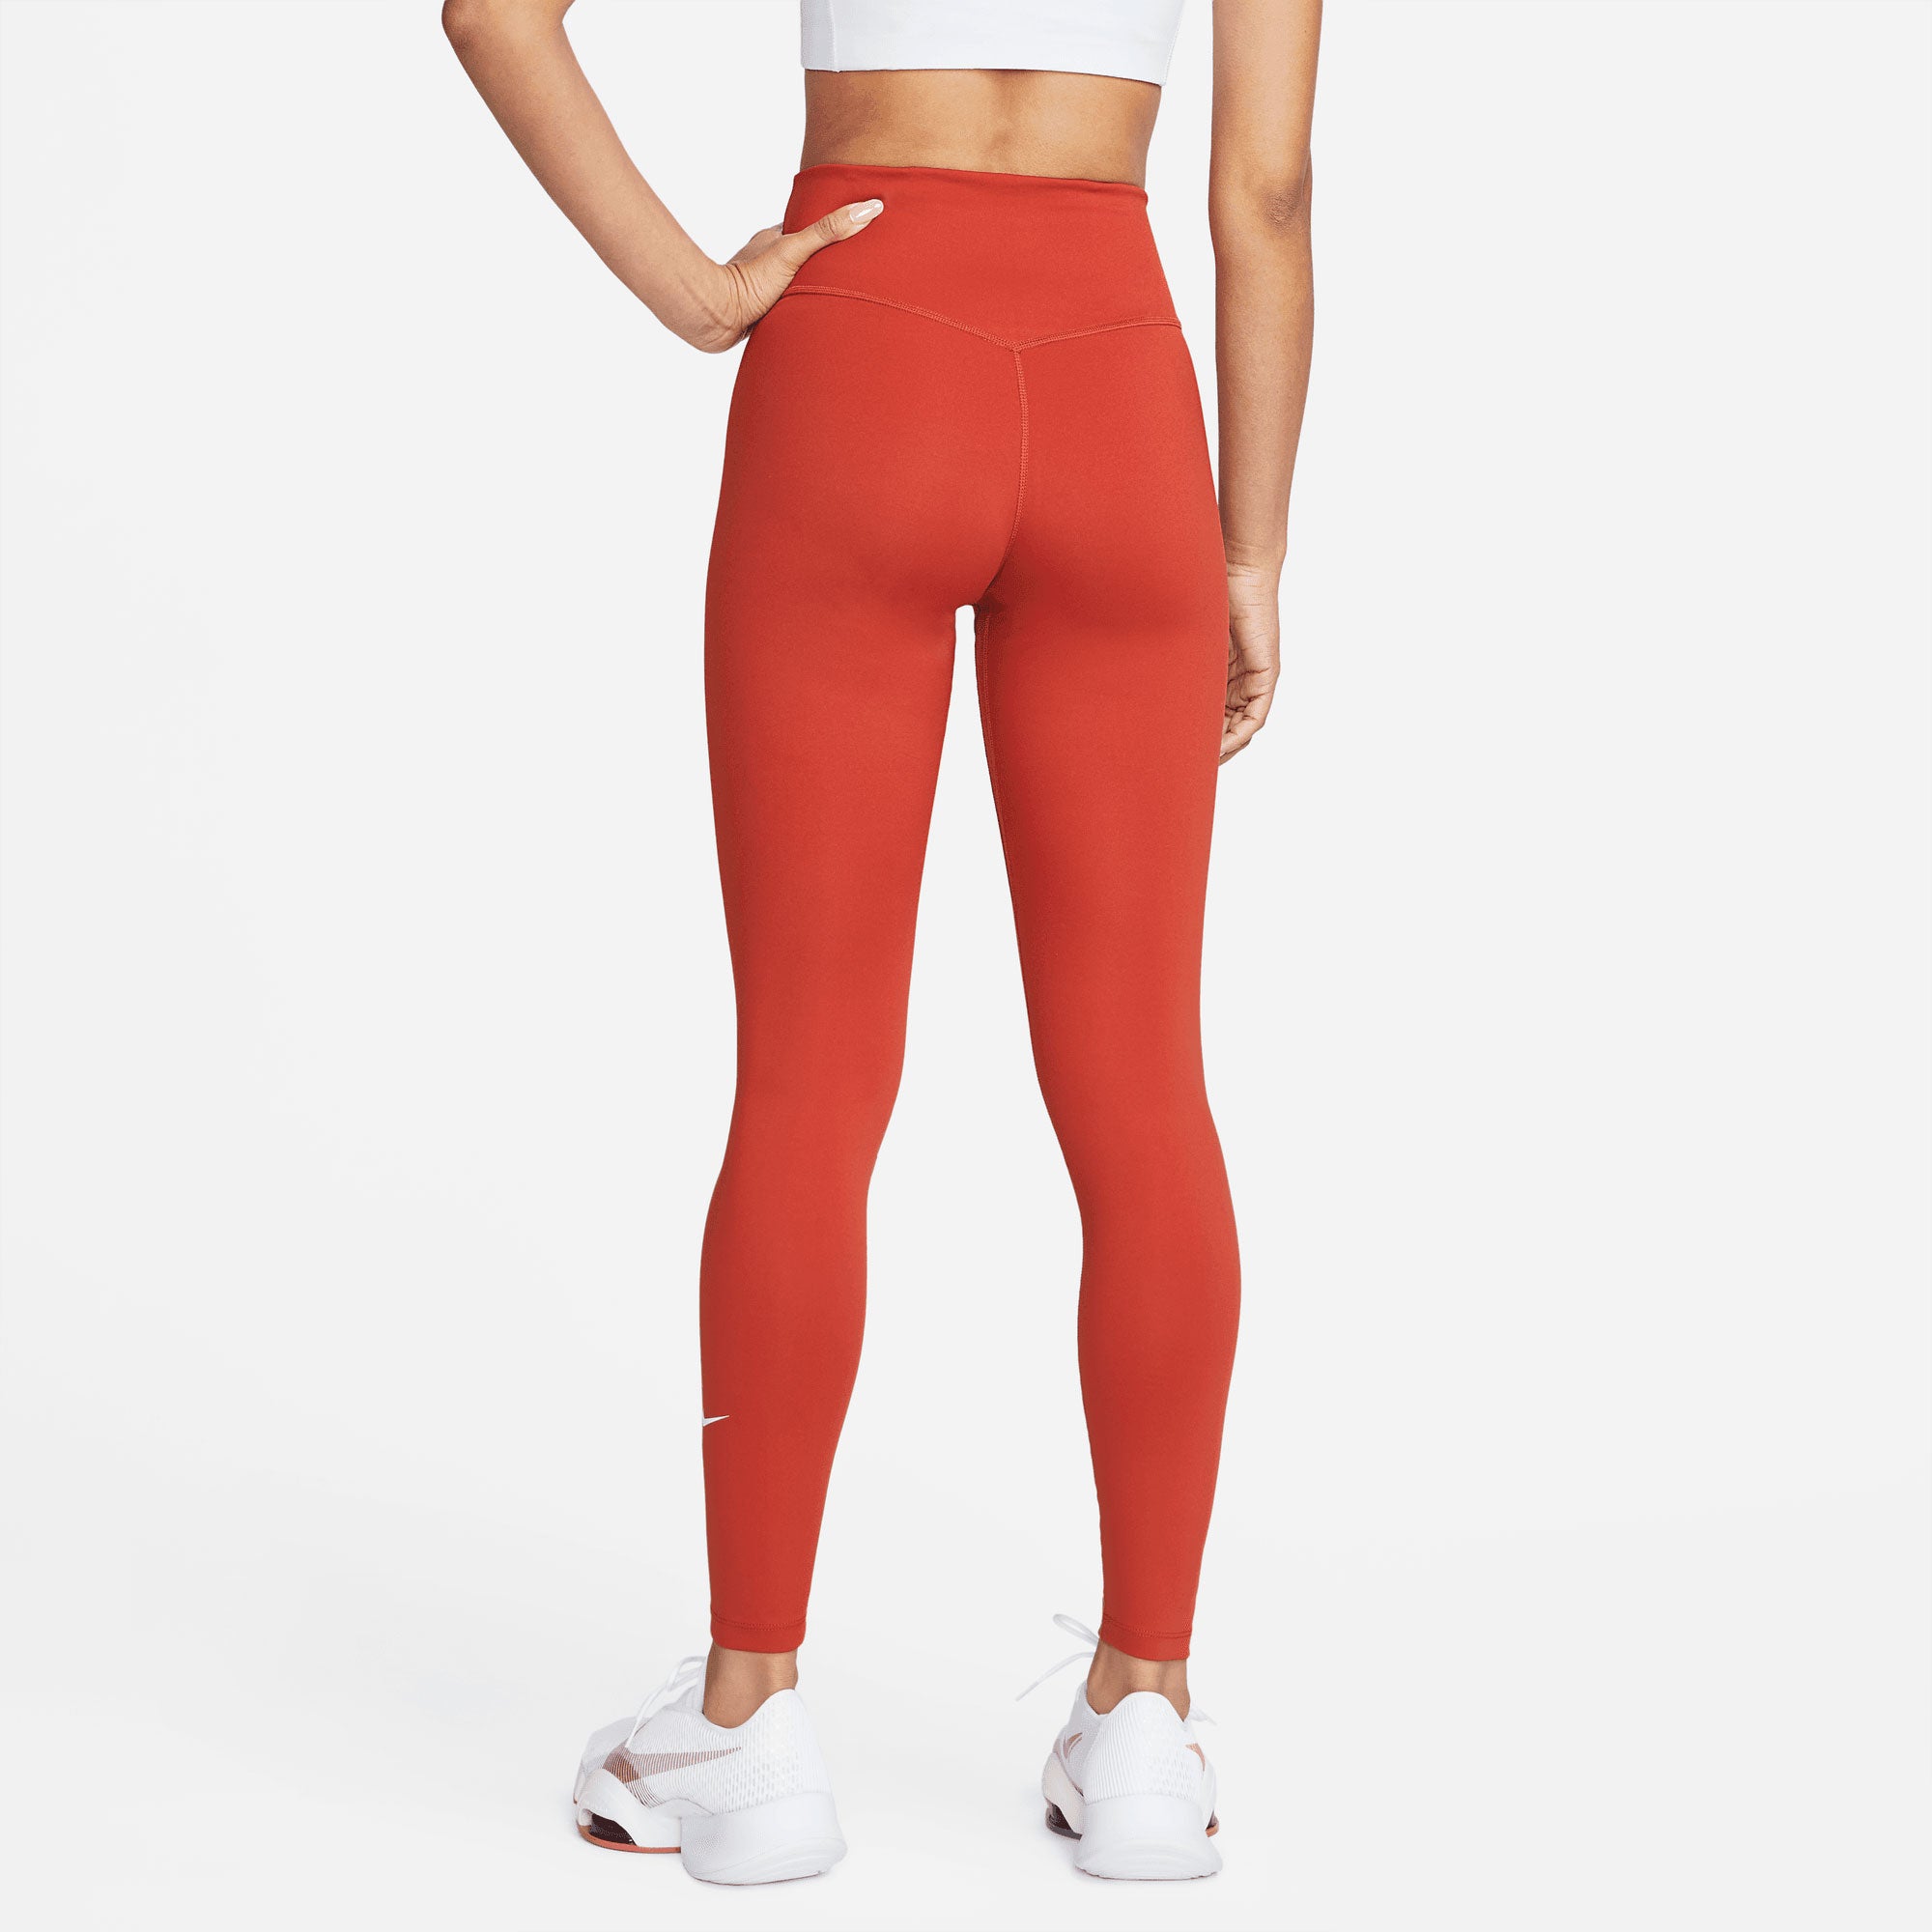 Nike One Luxe Tights Womens Burnt Sunrise, £33.00